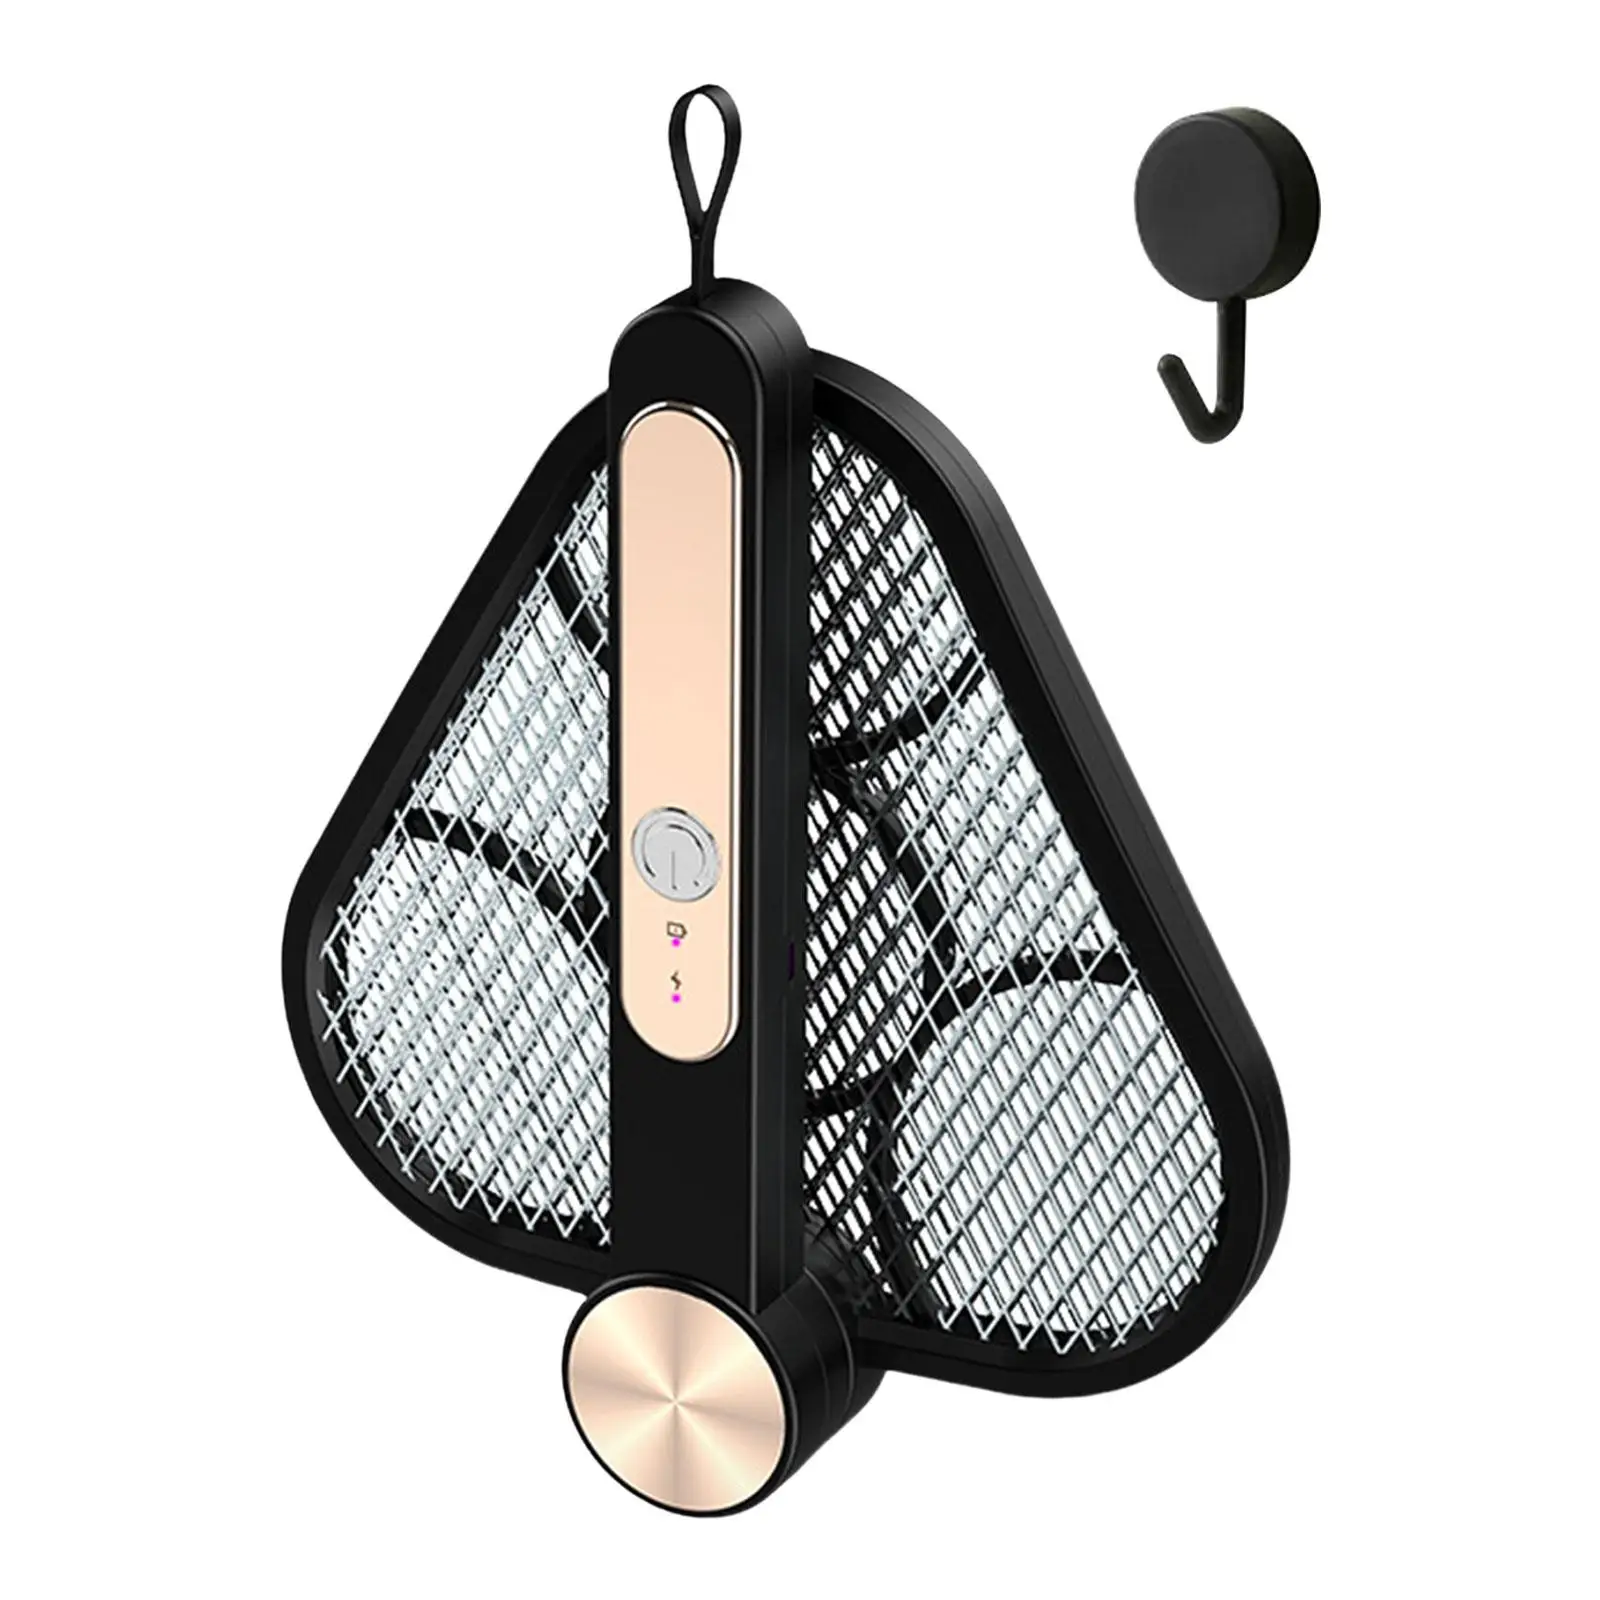 Mosquito Killer Lamp Fly Swatter Repellent Lamp Rechargeable 2 in 1 Bug Killer Swatter for Backyard Kitchen Patio Bedroom Office